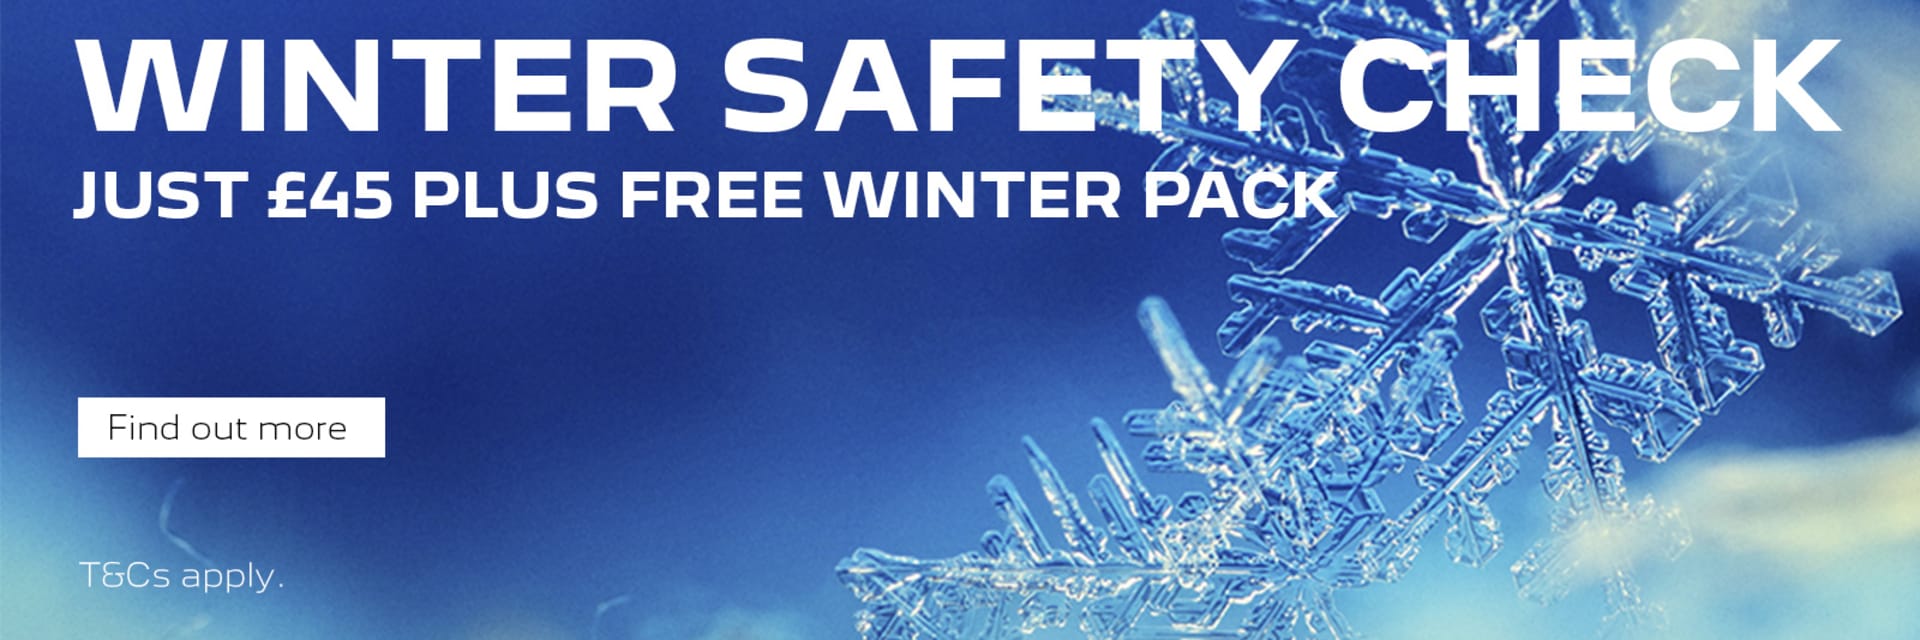 Winter Safety Check with FREE Winter Pack